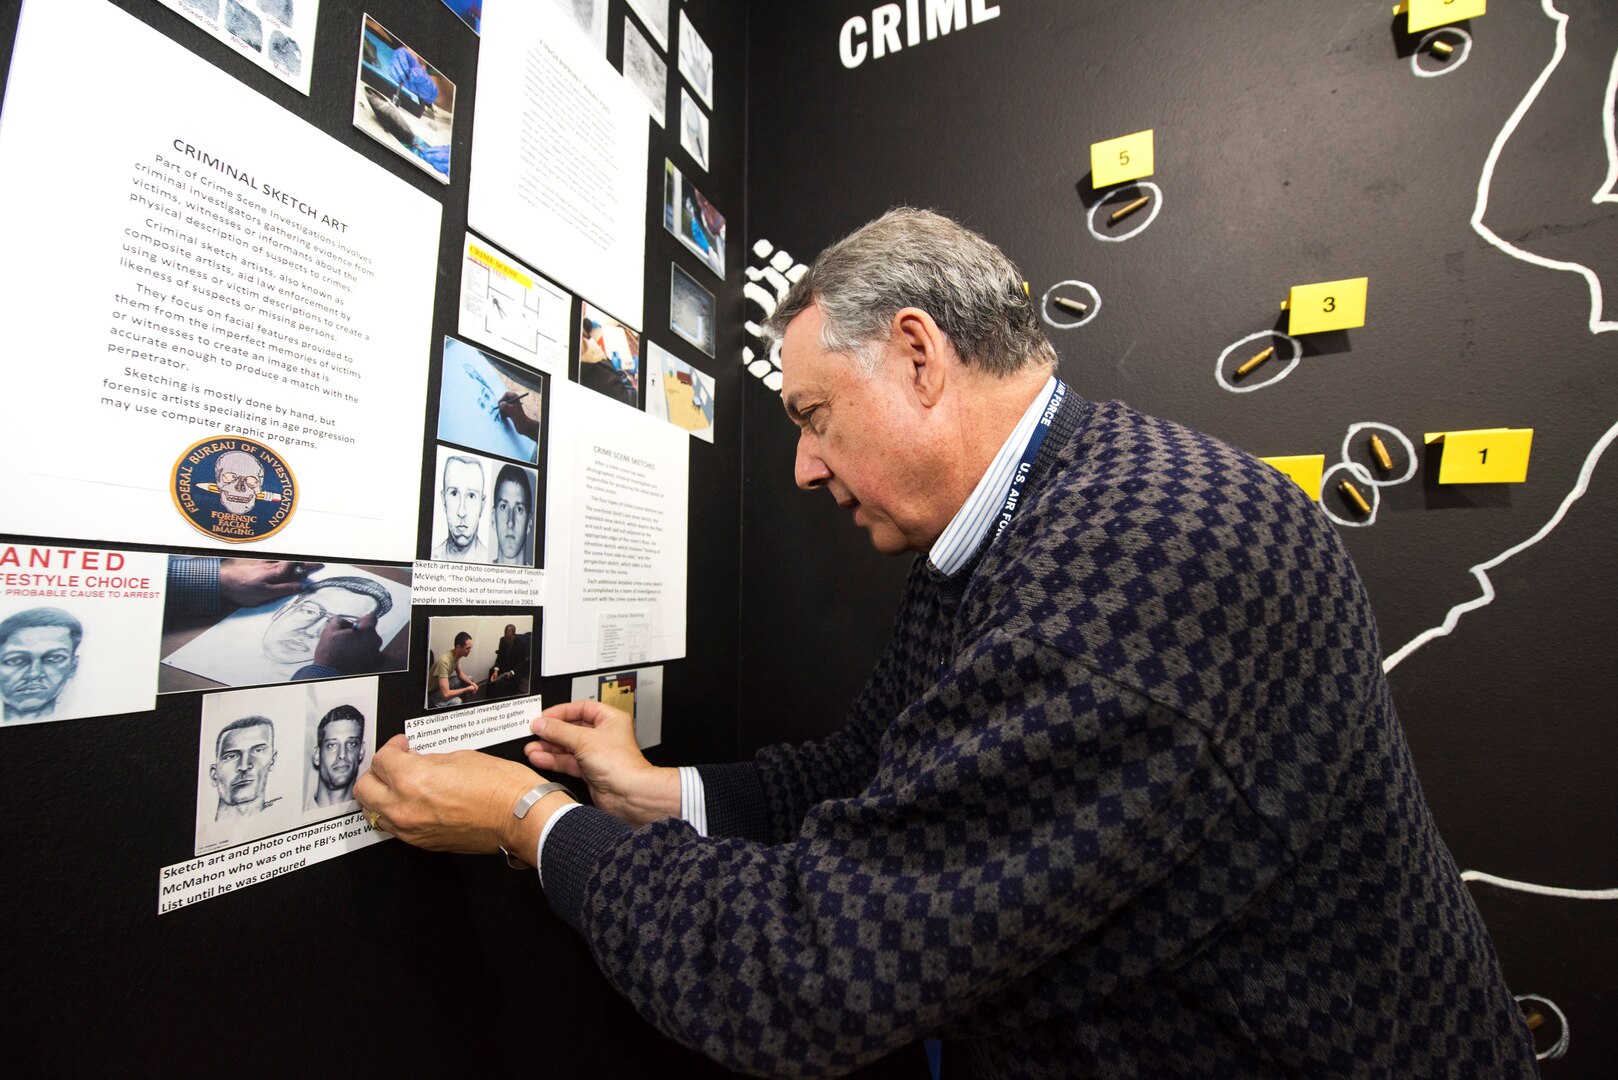 Rudy Purificato, Airman Heritage Museum director, works on a new crime scene exhibit in the Security Forces Museum at Joint Base San Antonio-Lackland, Texas, Oct. 19, 2018. The Air Education and Training Command history office owns and is responsible for the Enlisted Heritage and Training Complex and they are committed to ensuring it will continue to grow and evolve into a world-class training environment for current and future Airmen.